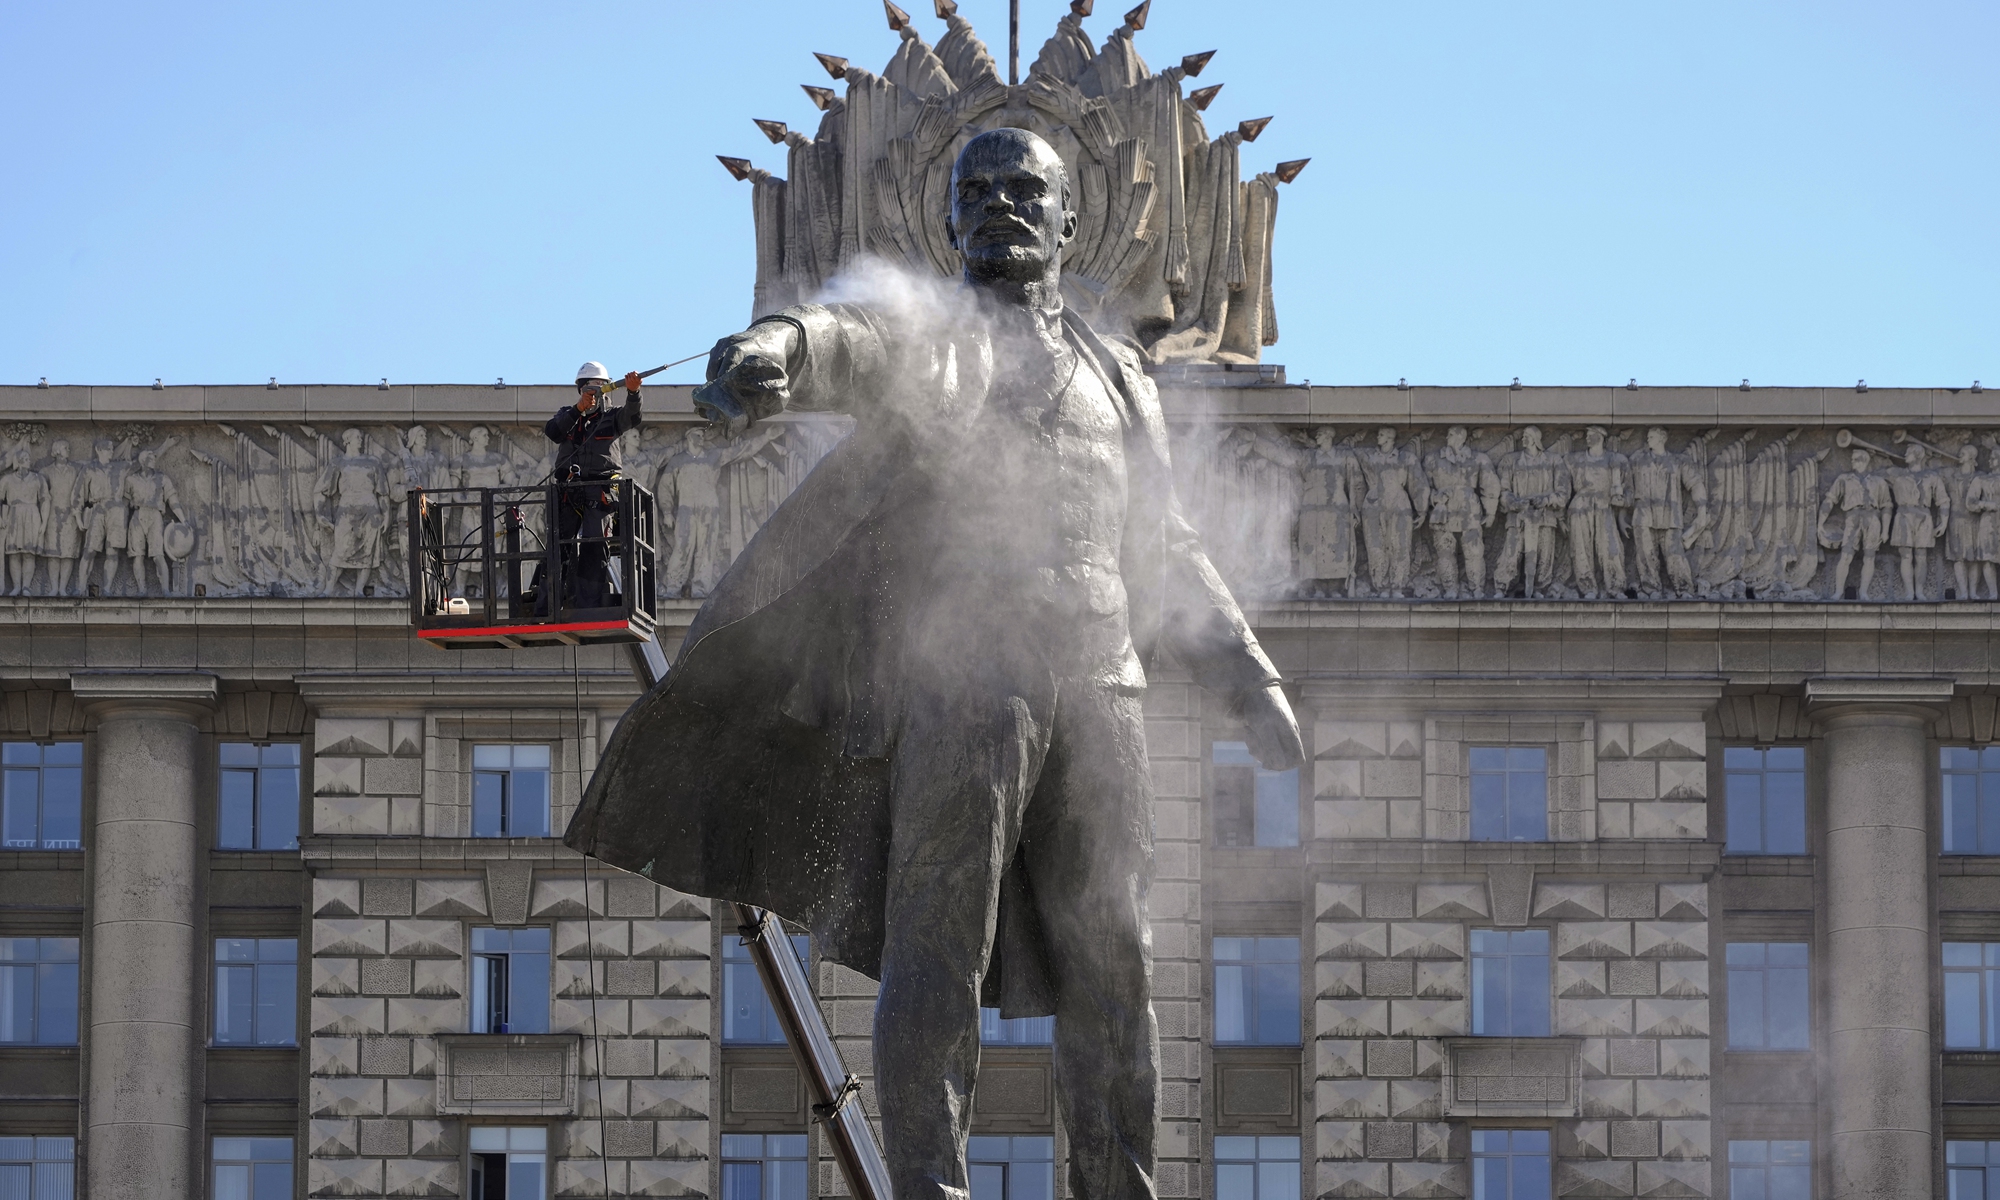 A worker of the Museum of Urban Sculpture washes a statue of Soviet Union founder Vladimir Lenin on the eve of Lenin's 152nd birthday in St. Petersburg, Russia, on April 21, 2022. Photo: VCG